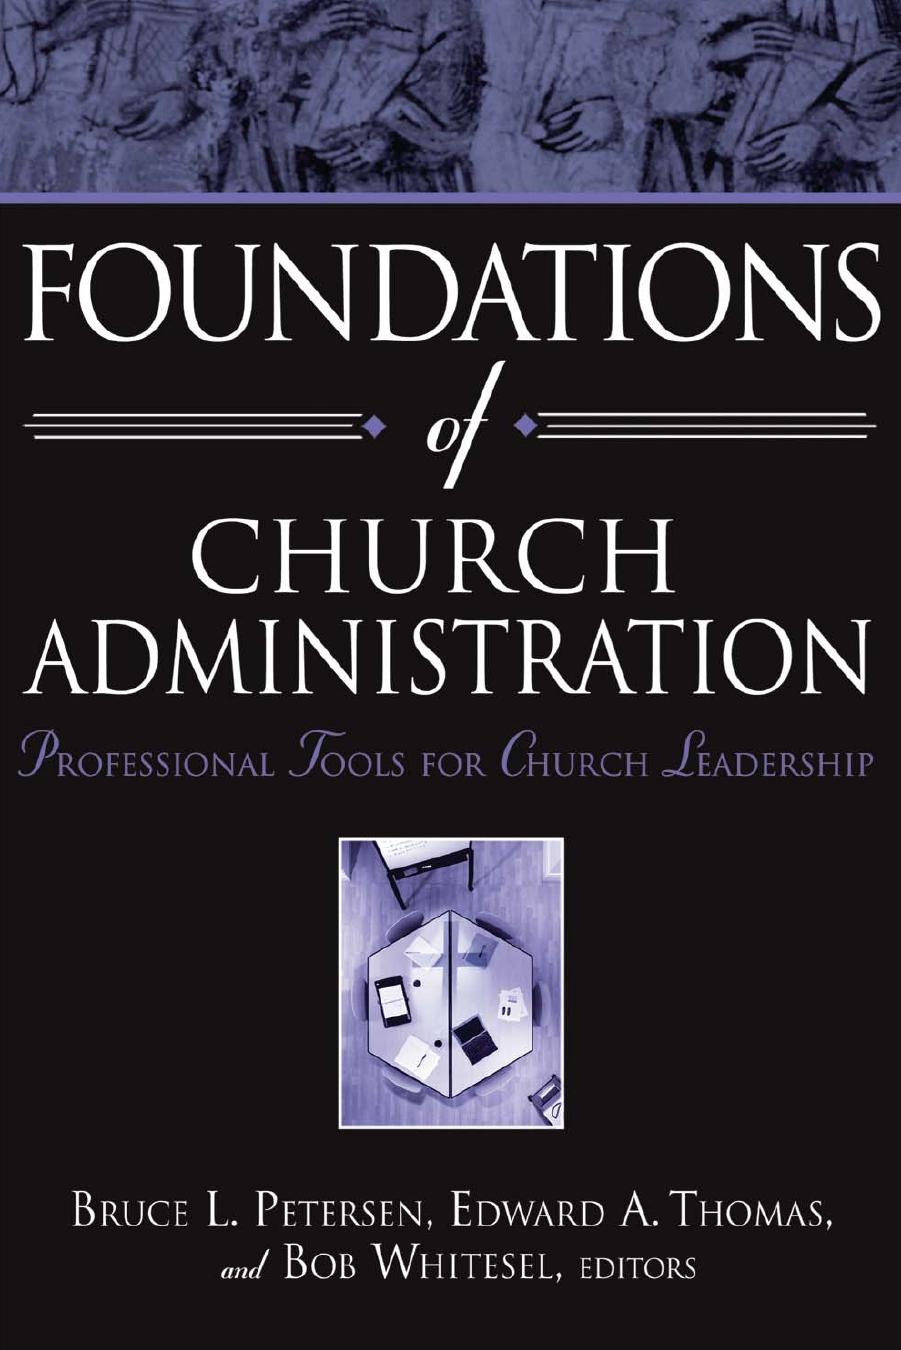 Foundations of Church Administration: Professional Tools for Church Leadership by Bruce L. Petersen; Edward A. Thomas; Bob Whiteselm